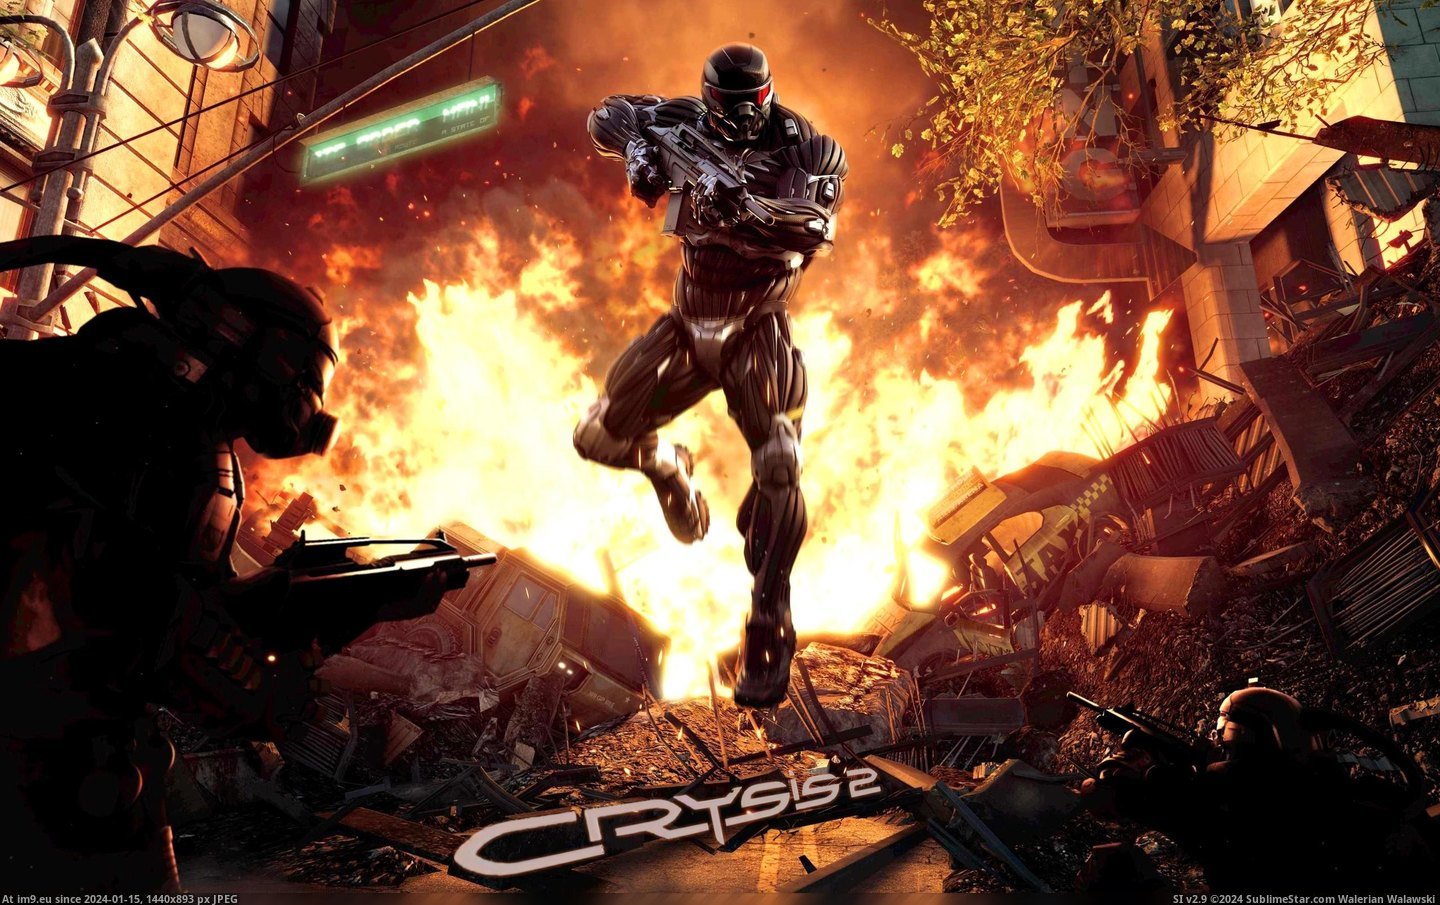 #Wallpaper #Crysis #Wide 2011 Crysis 2 Wide HD Wallpaper Pic. (Obraz z album Unique HD Wallpapers))